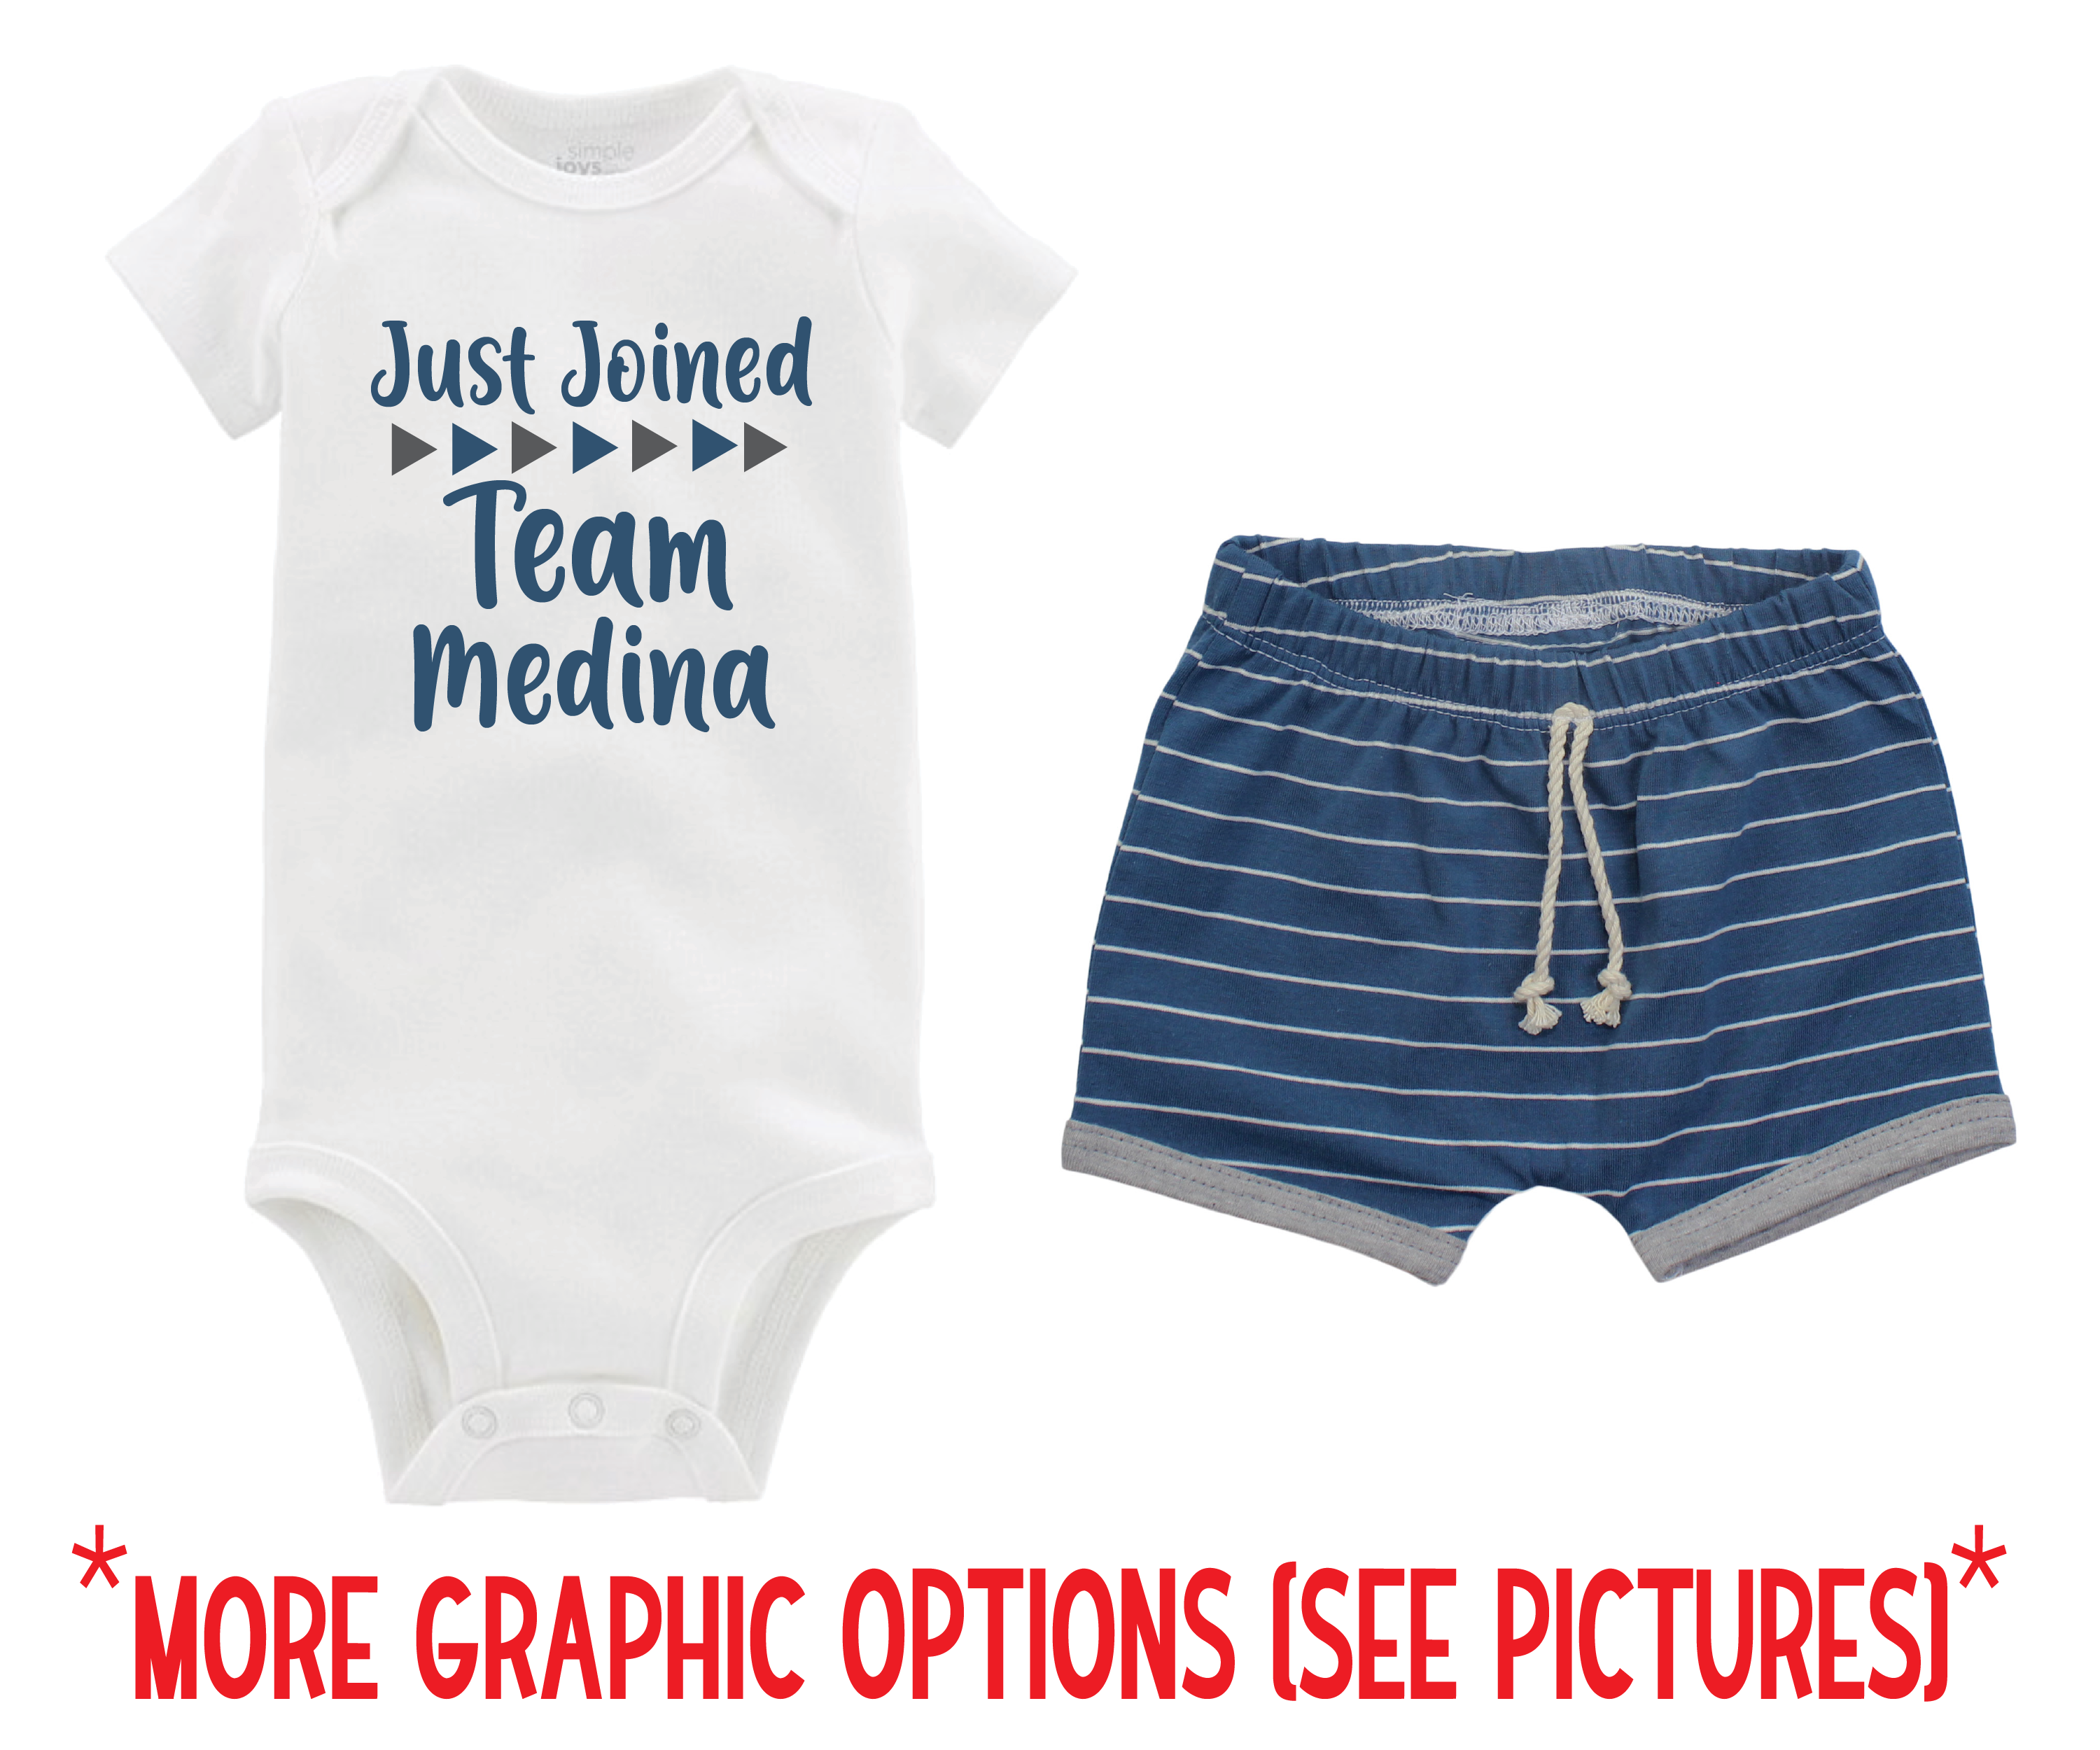 Boy Blue Stripe Baby Short Outfit